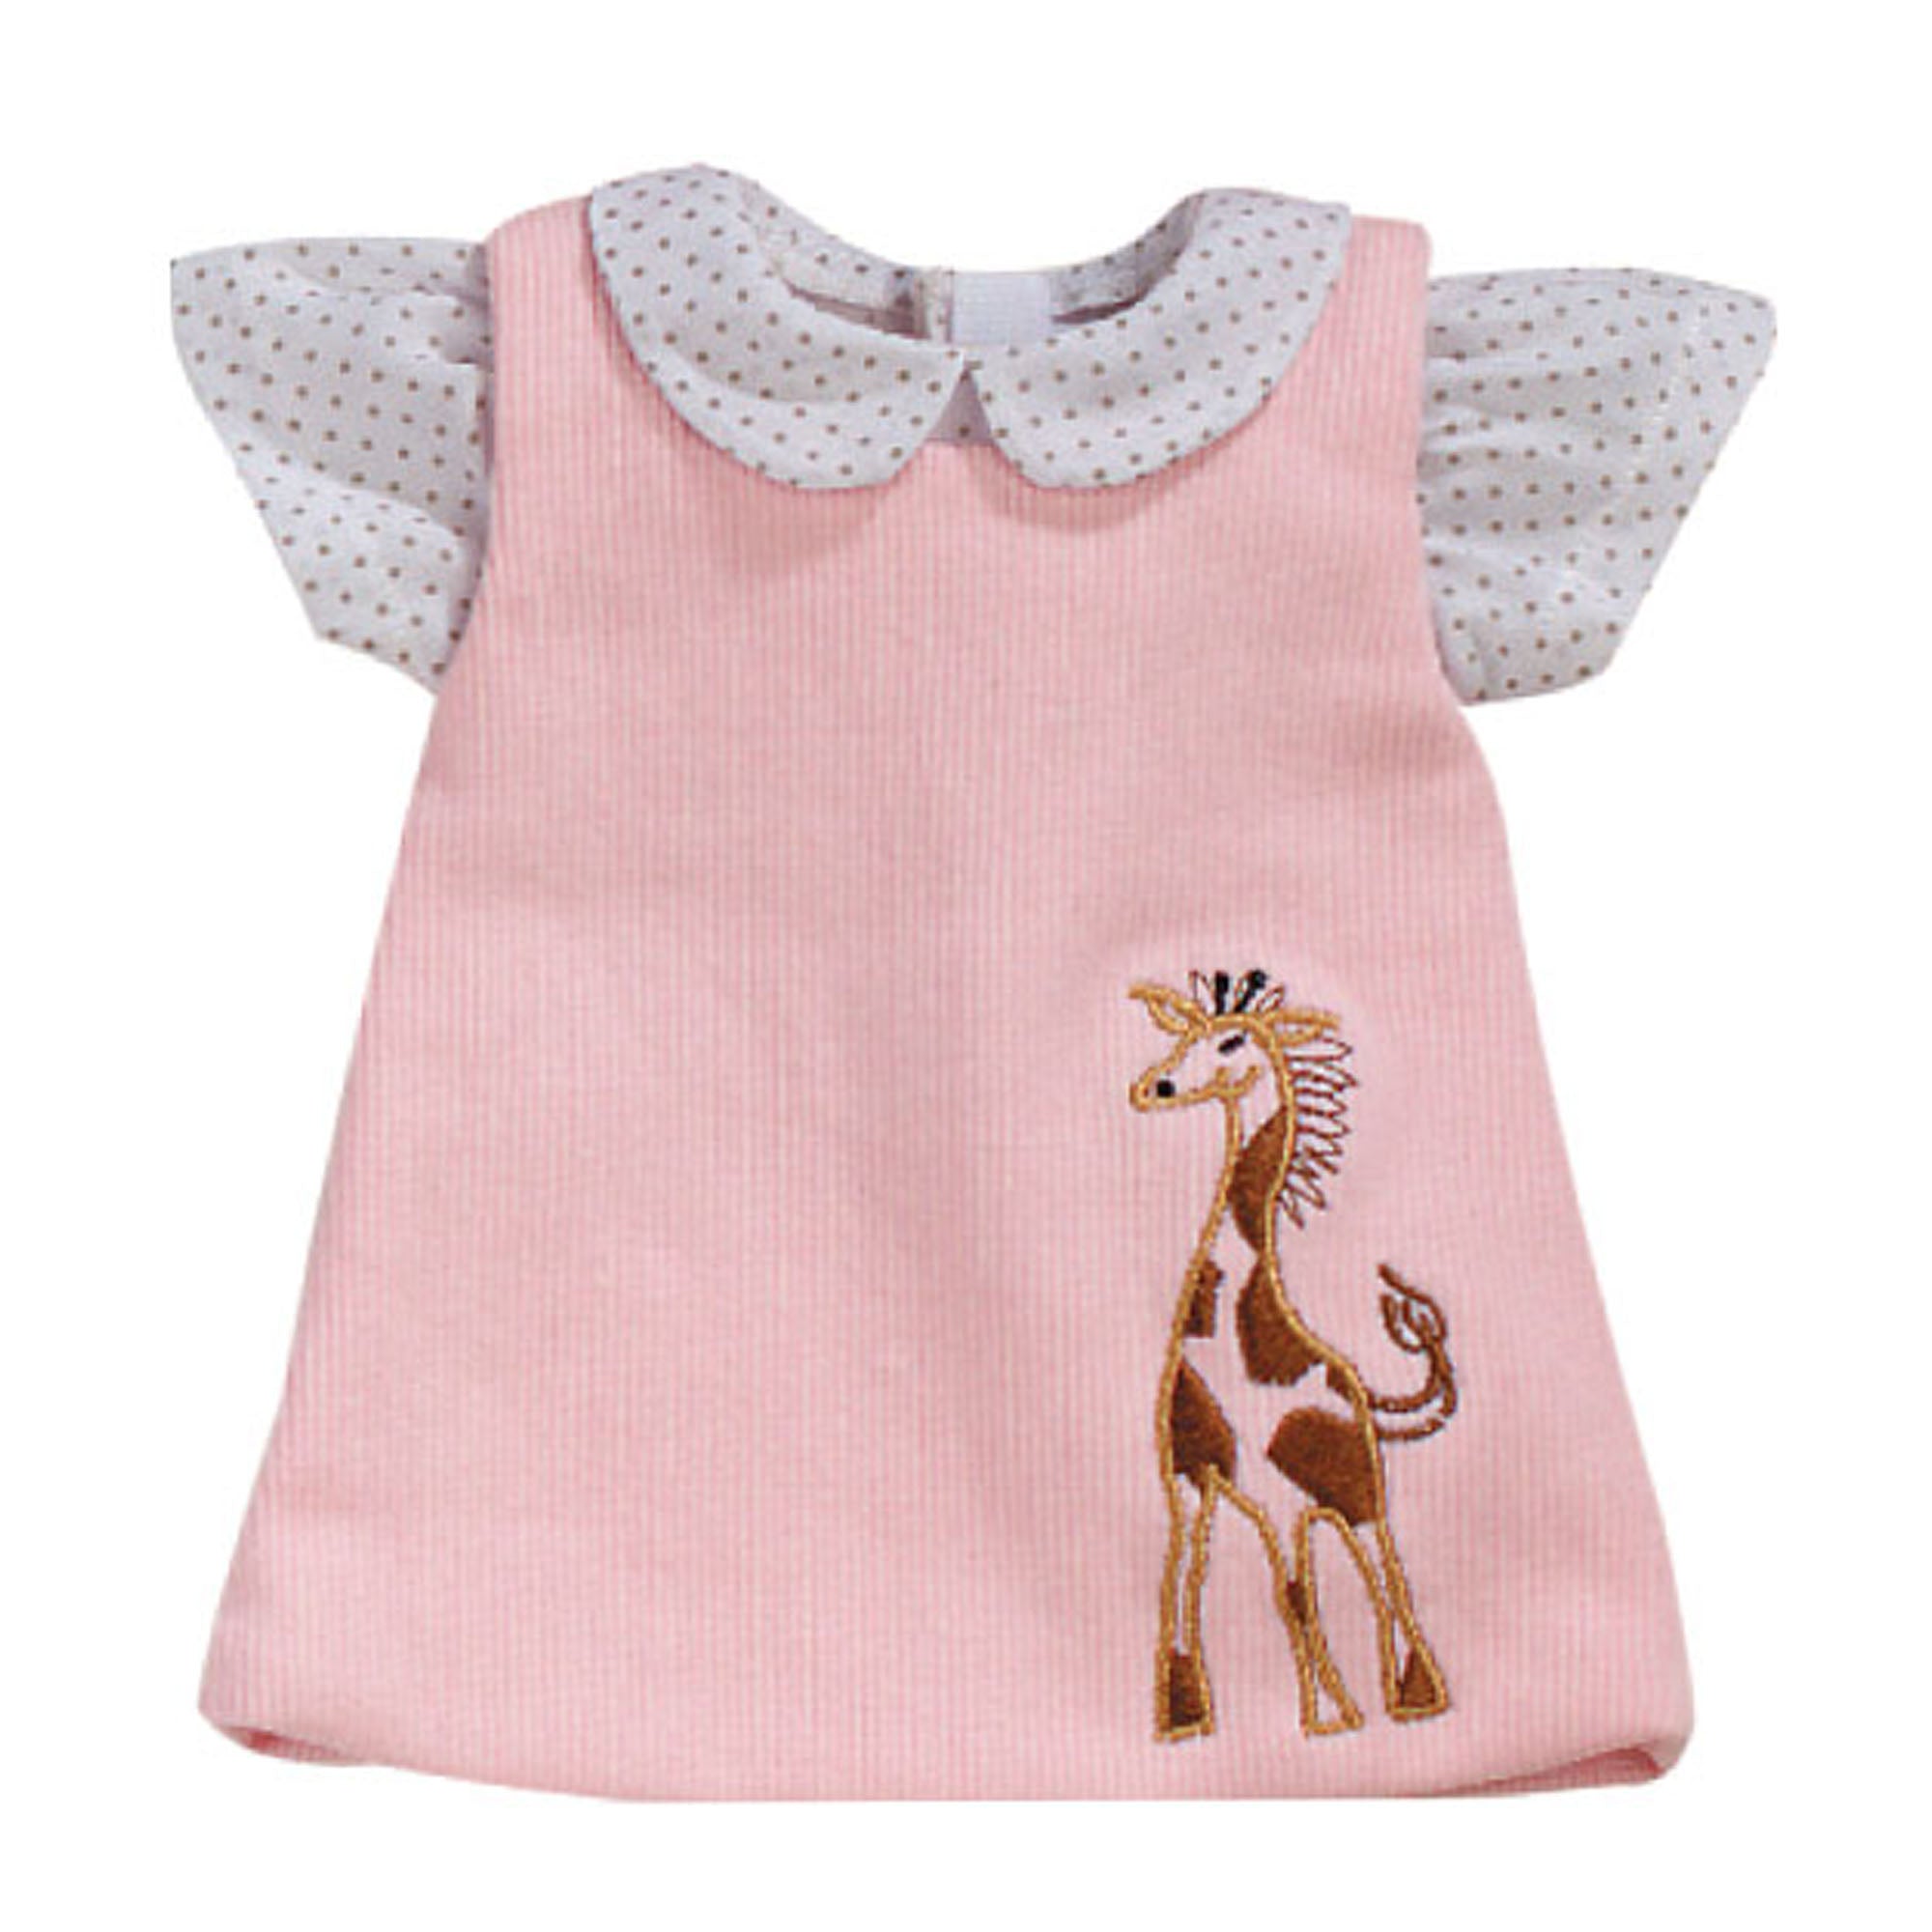 Sophia’s Jumper with Embroidered Giraffe Applique & Polka Dot Blouse Outfit Set for 15” Baby Dolls, Light Pink